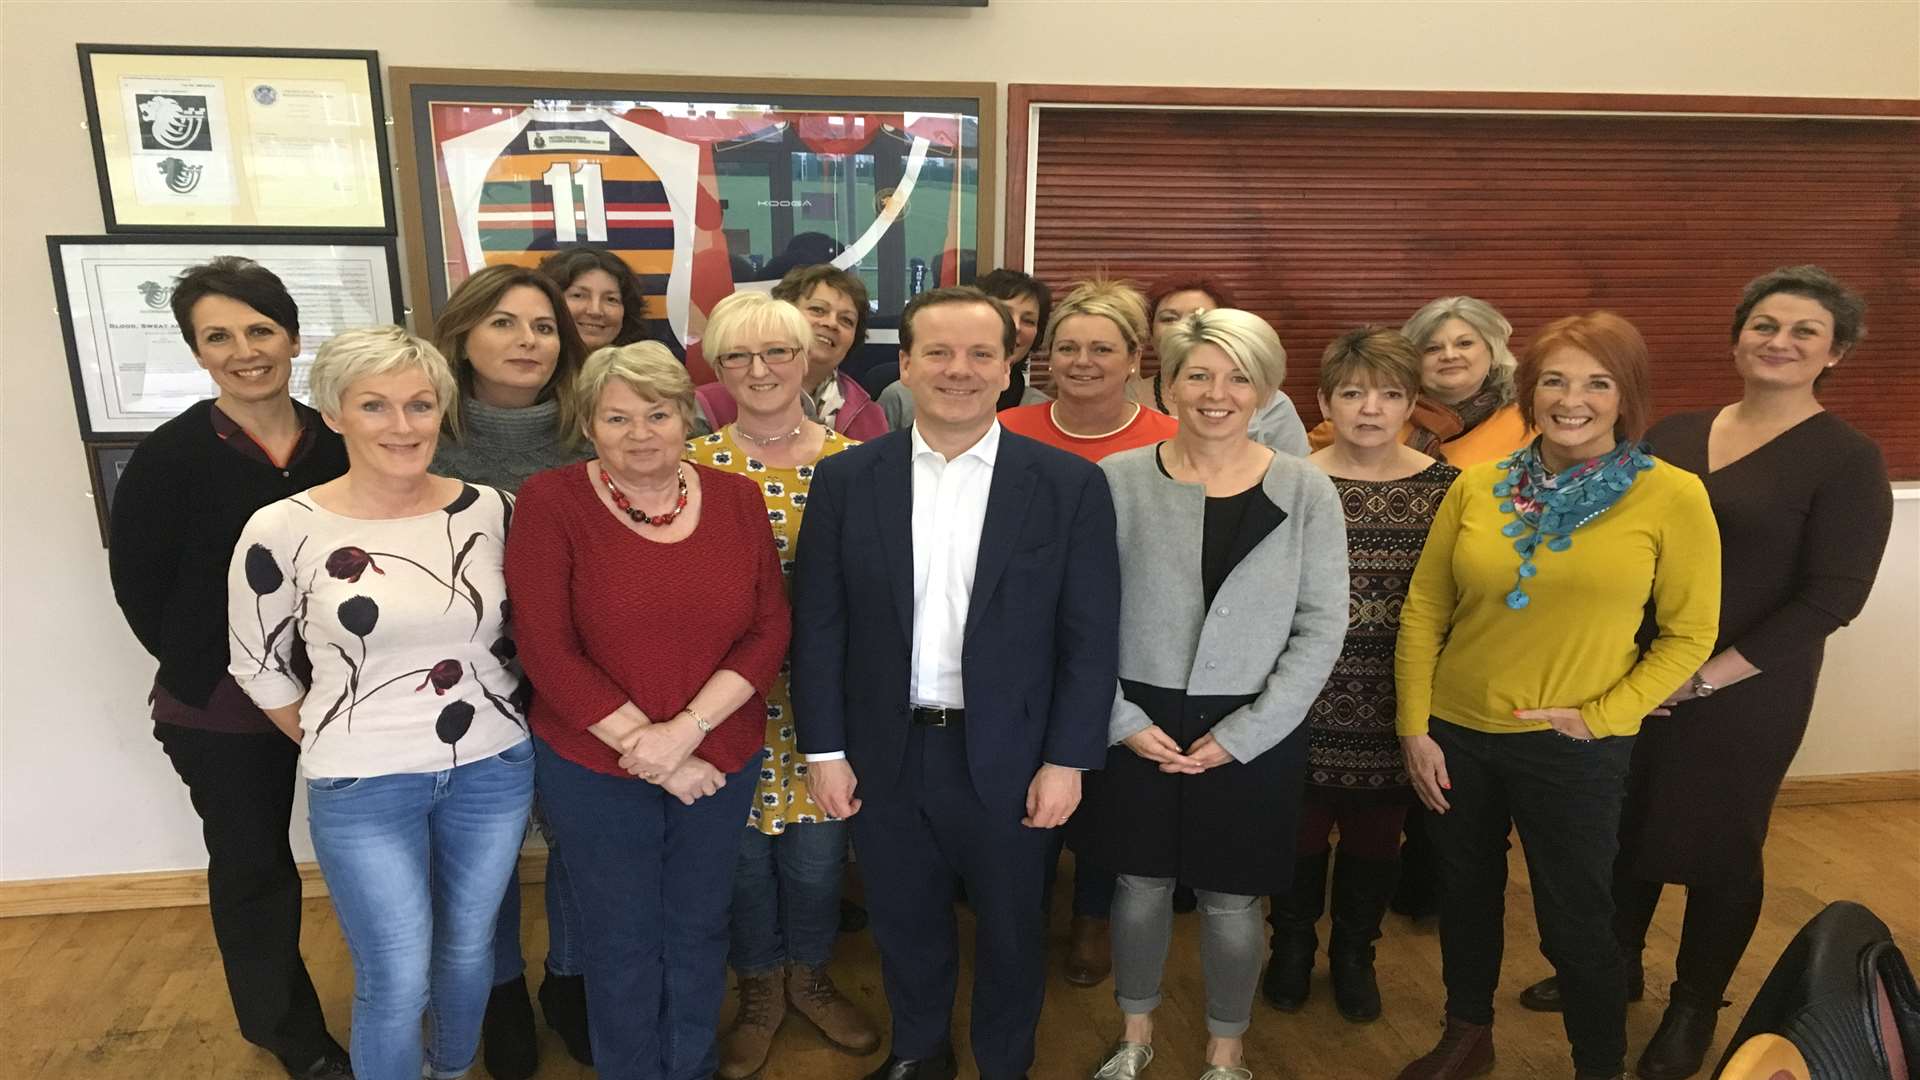 MP Charlie Elphicke meets Breast Cancer Girls of Deal